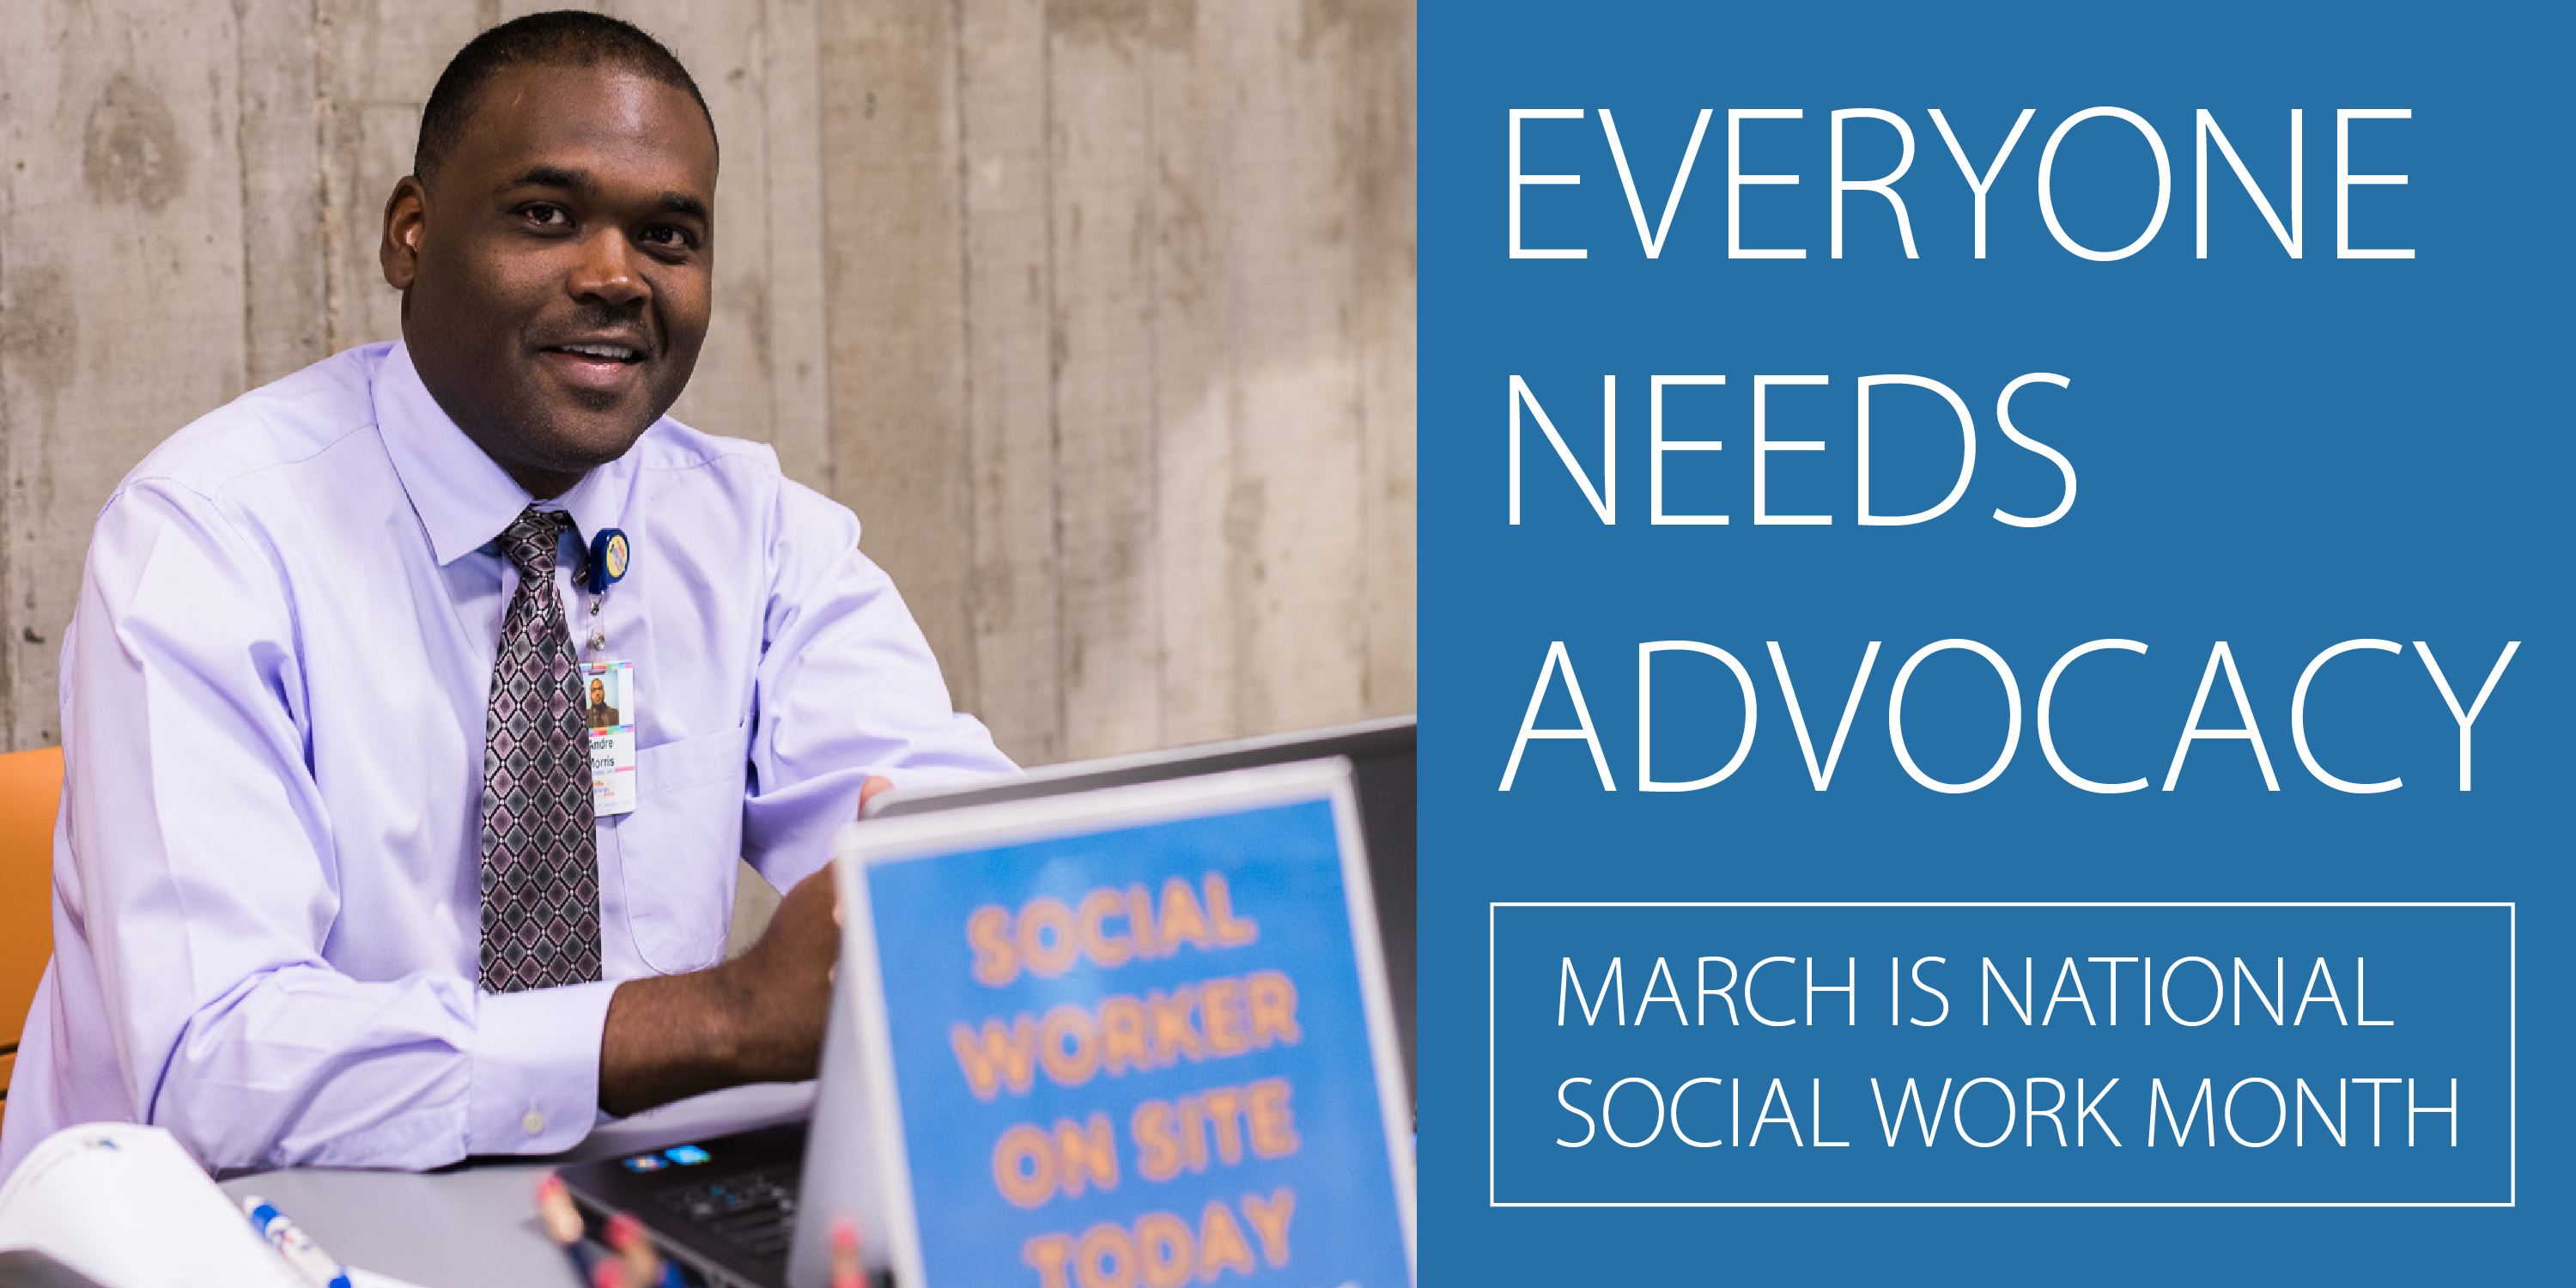 Everyone Needs Advocacy - March is National Social Work Month